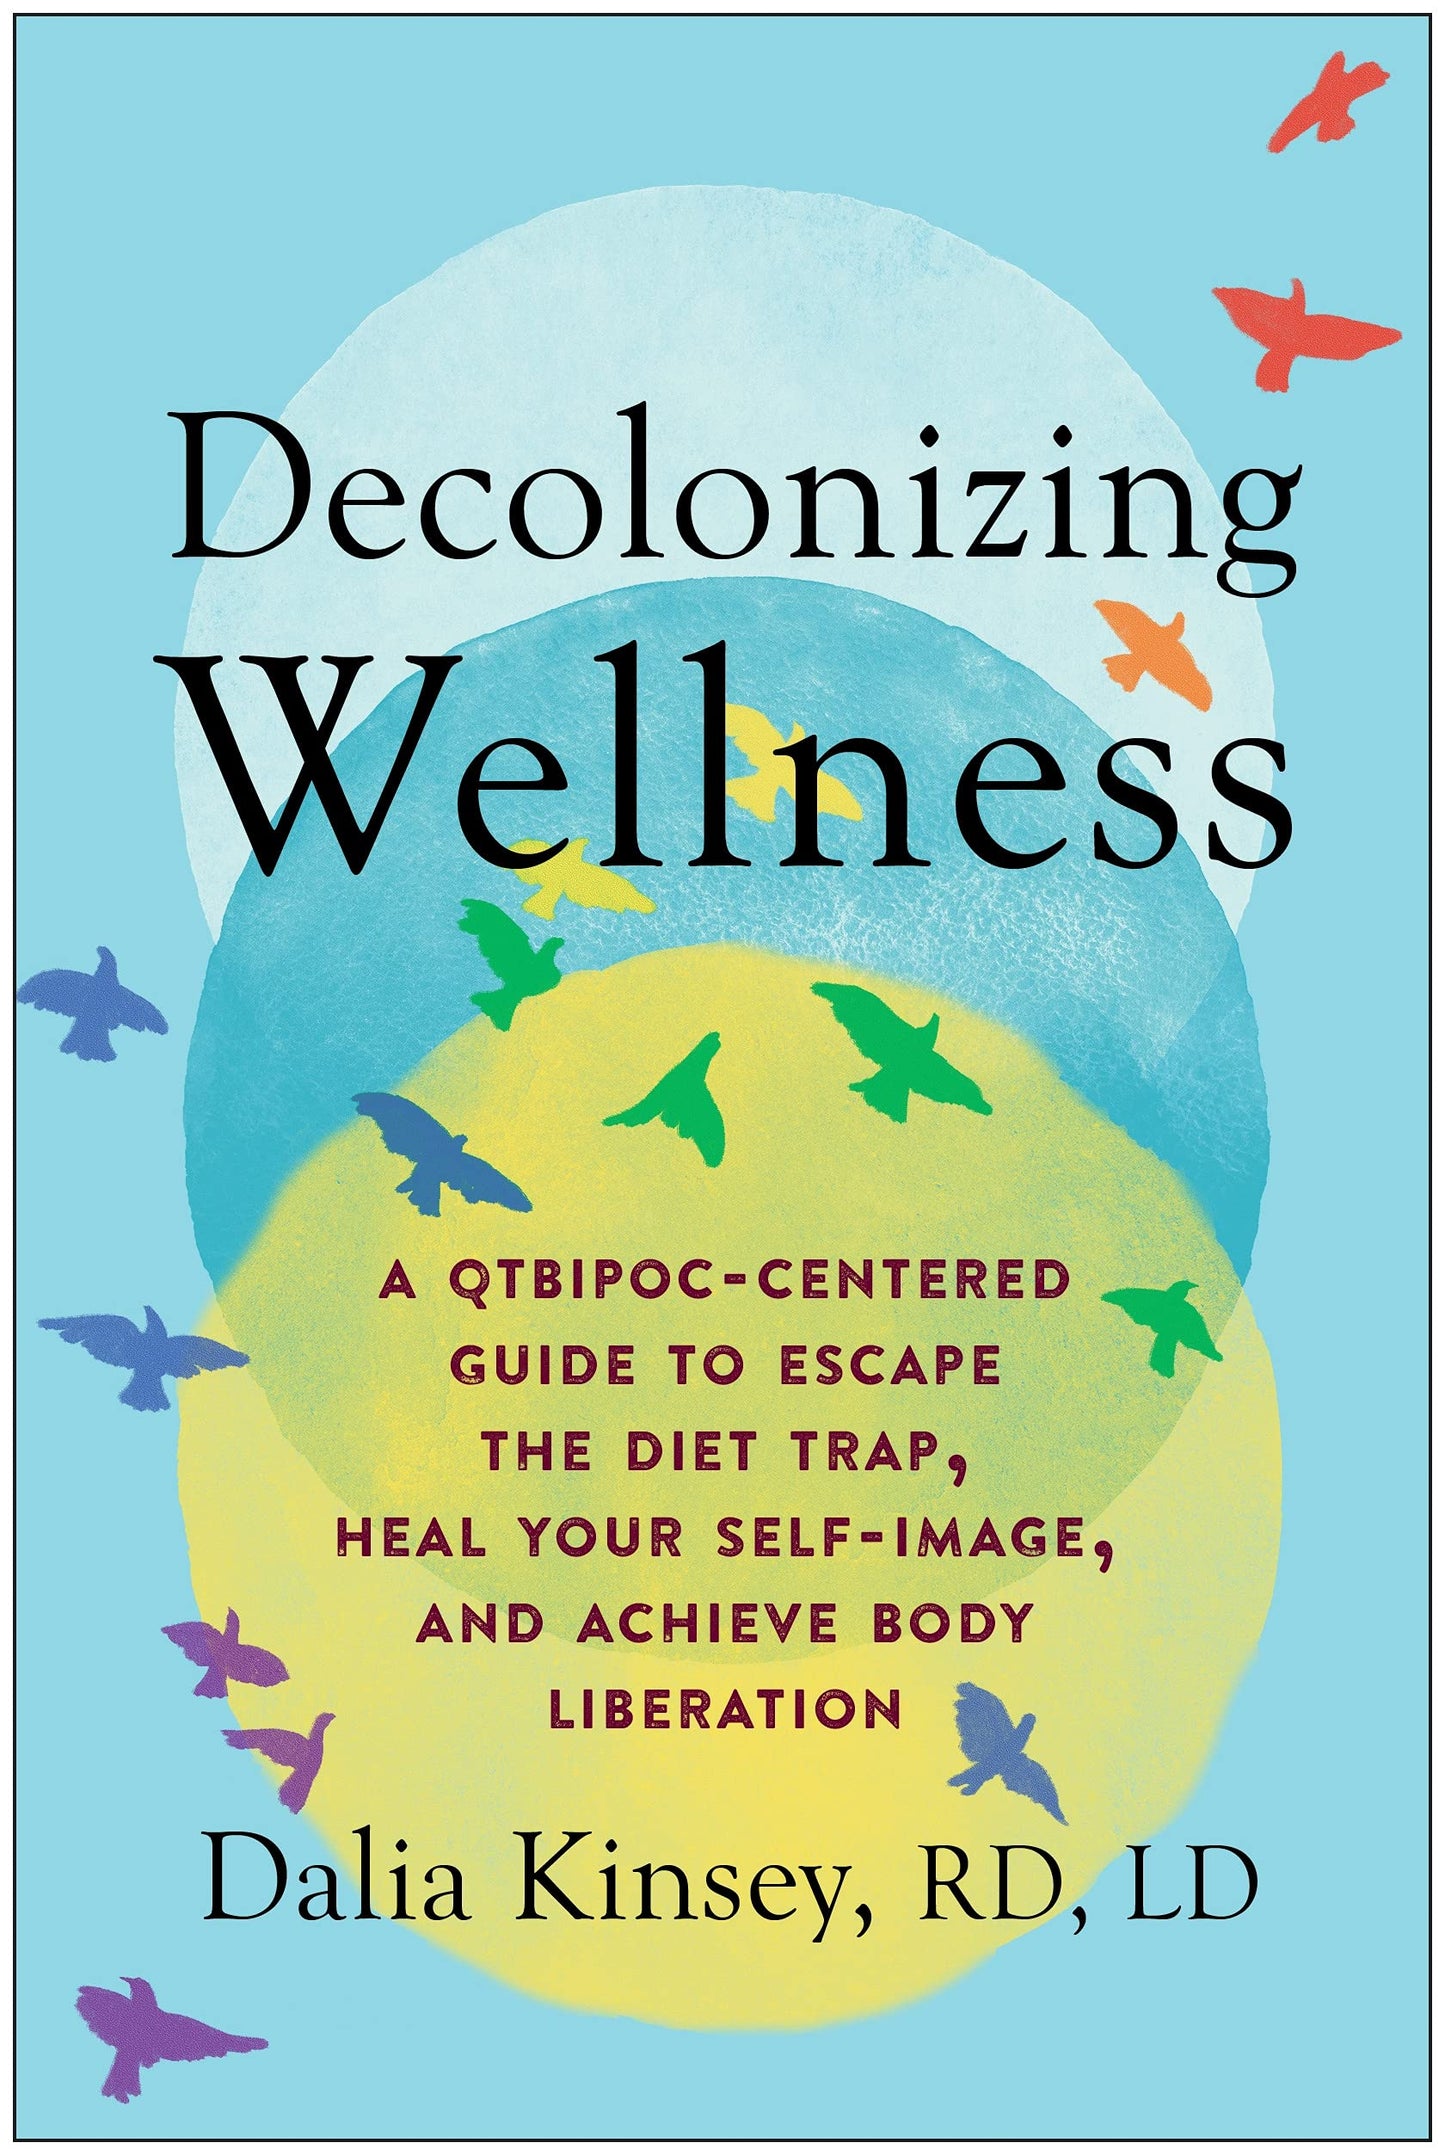 Decolonizing Wellness // A Qtbipoc-Centered Guide to Escape the Diet Trap, Heal Your Self-Image, and Achieve Body Liberation